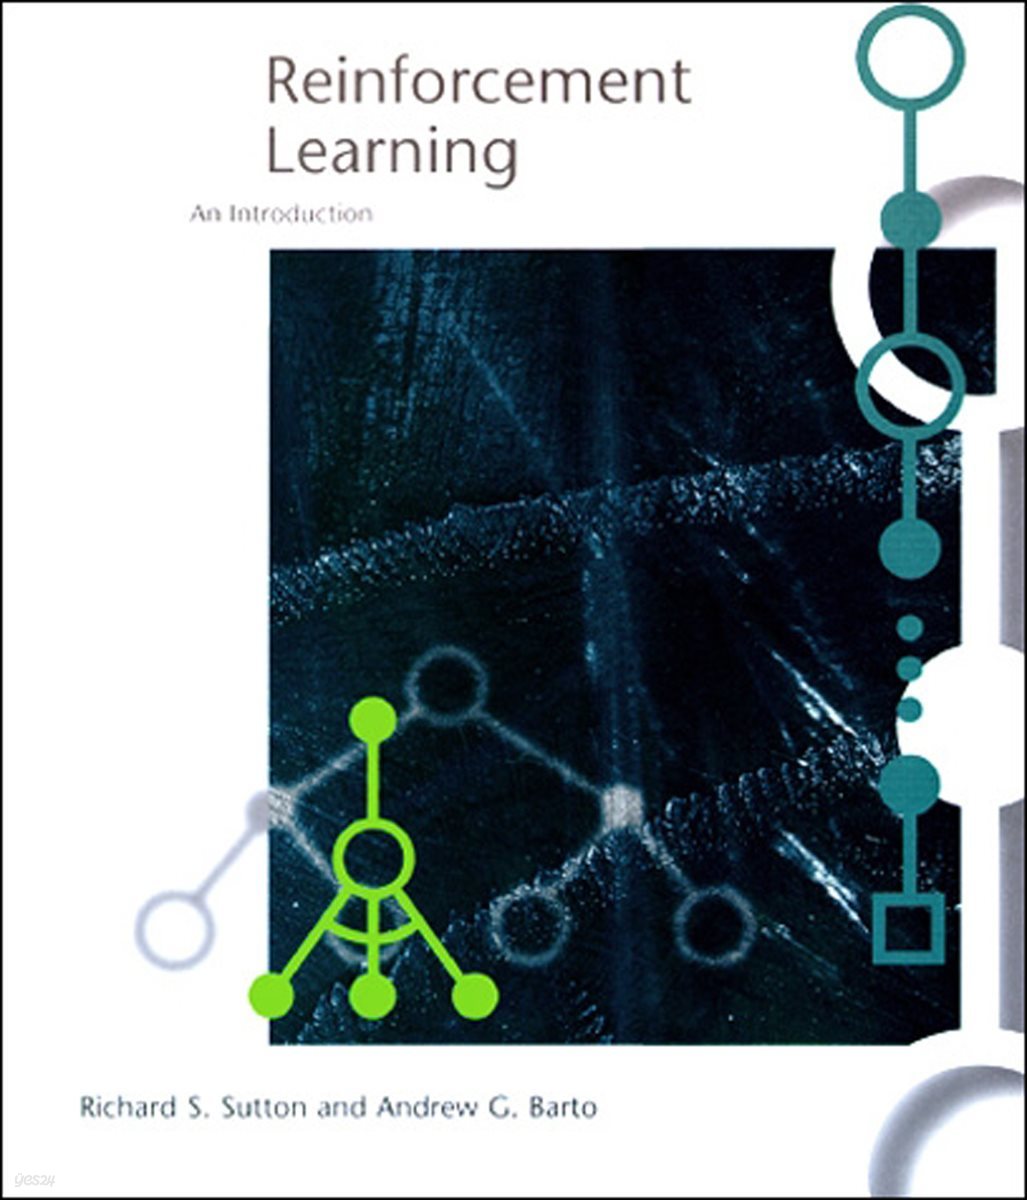 Reinforcement Learning, second edition